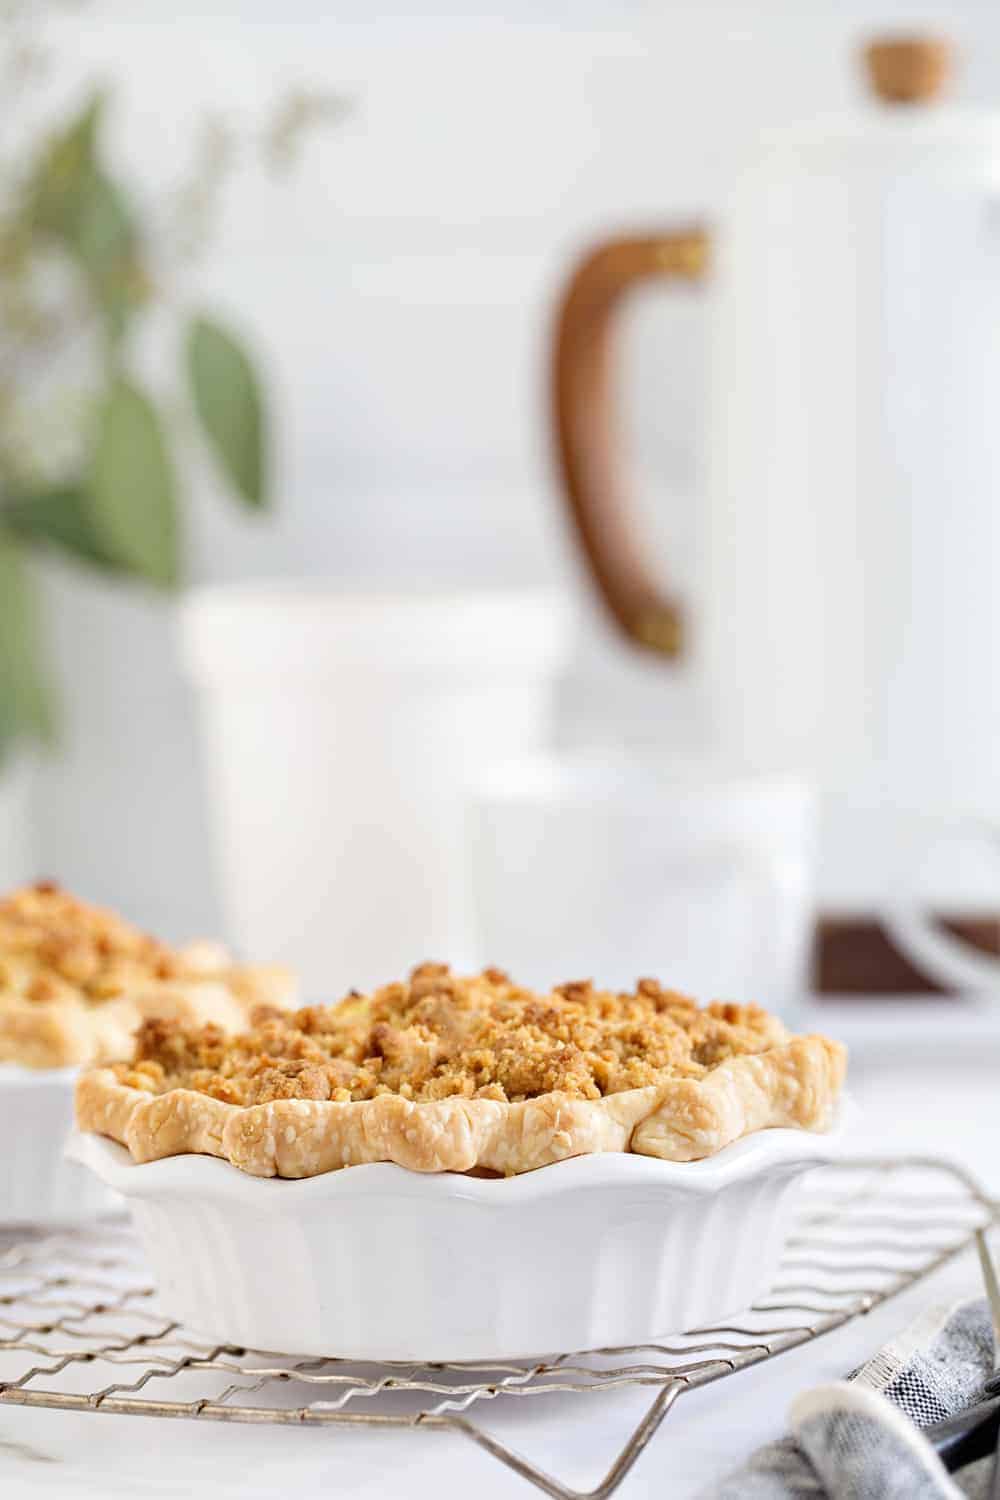 Mini Apple Pies are a simple and delicious twist on traditional apple pie. Plus, who doesn't love a mini dessert?